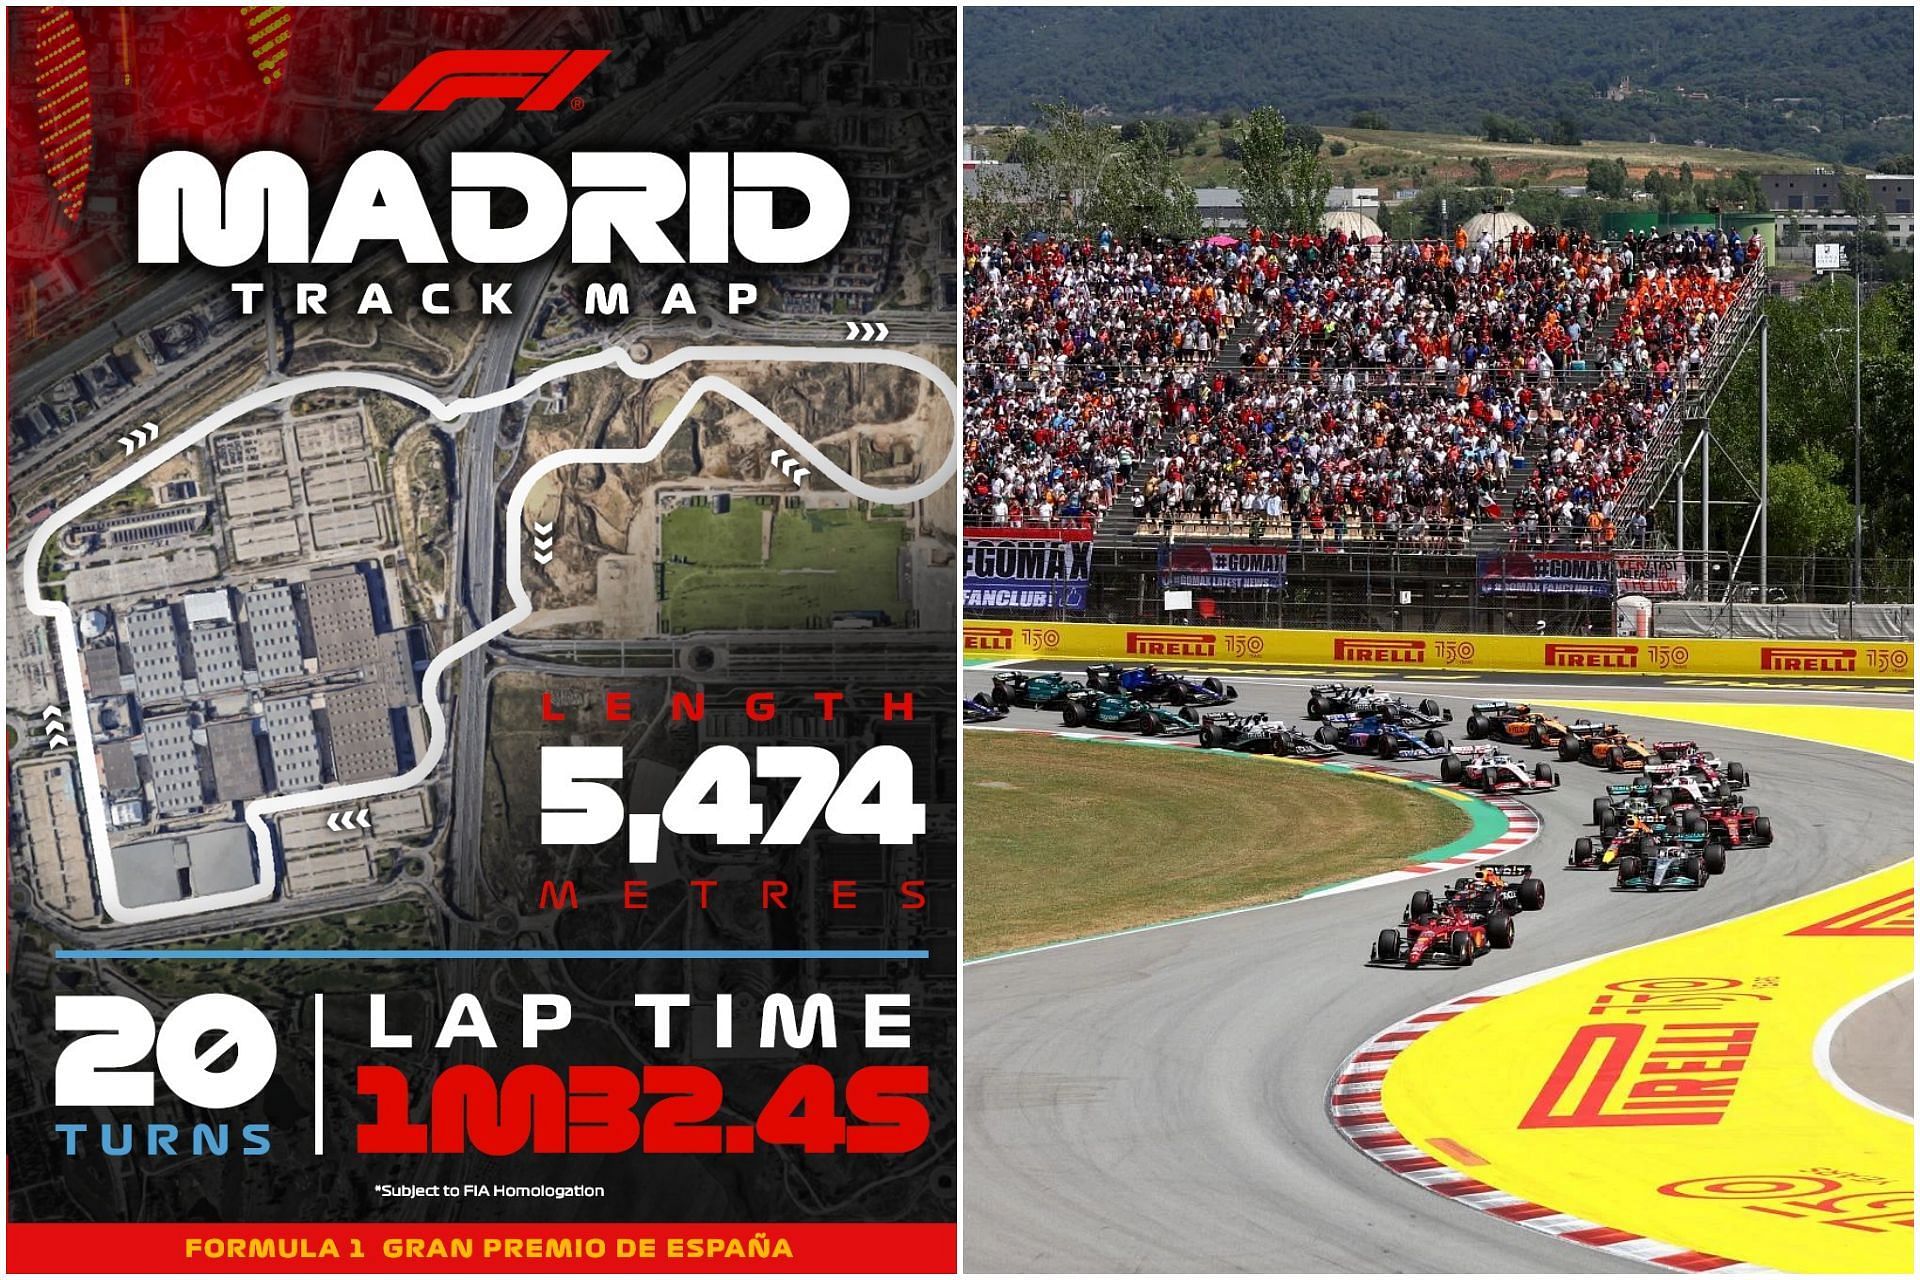 Upcoming Madrid track information (L) and start of the 2023 F1 Spanish GP in Barcelona (Collage via Sportskeeda)